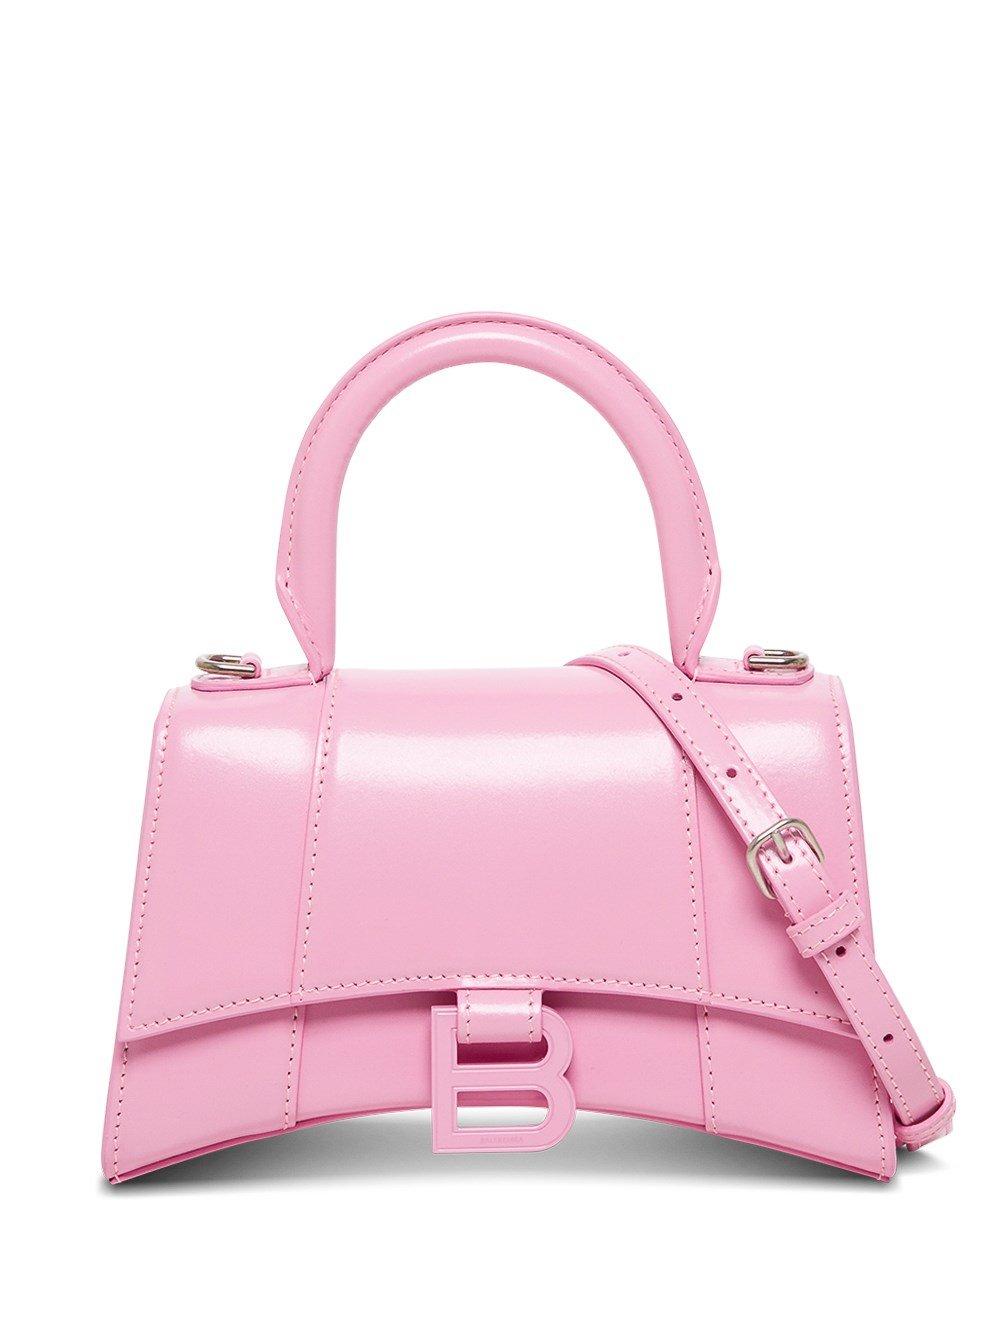 Balenciaga Hourglass Crossbody Bag In Pink Leather | Lyst